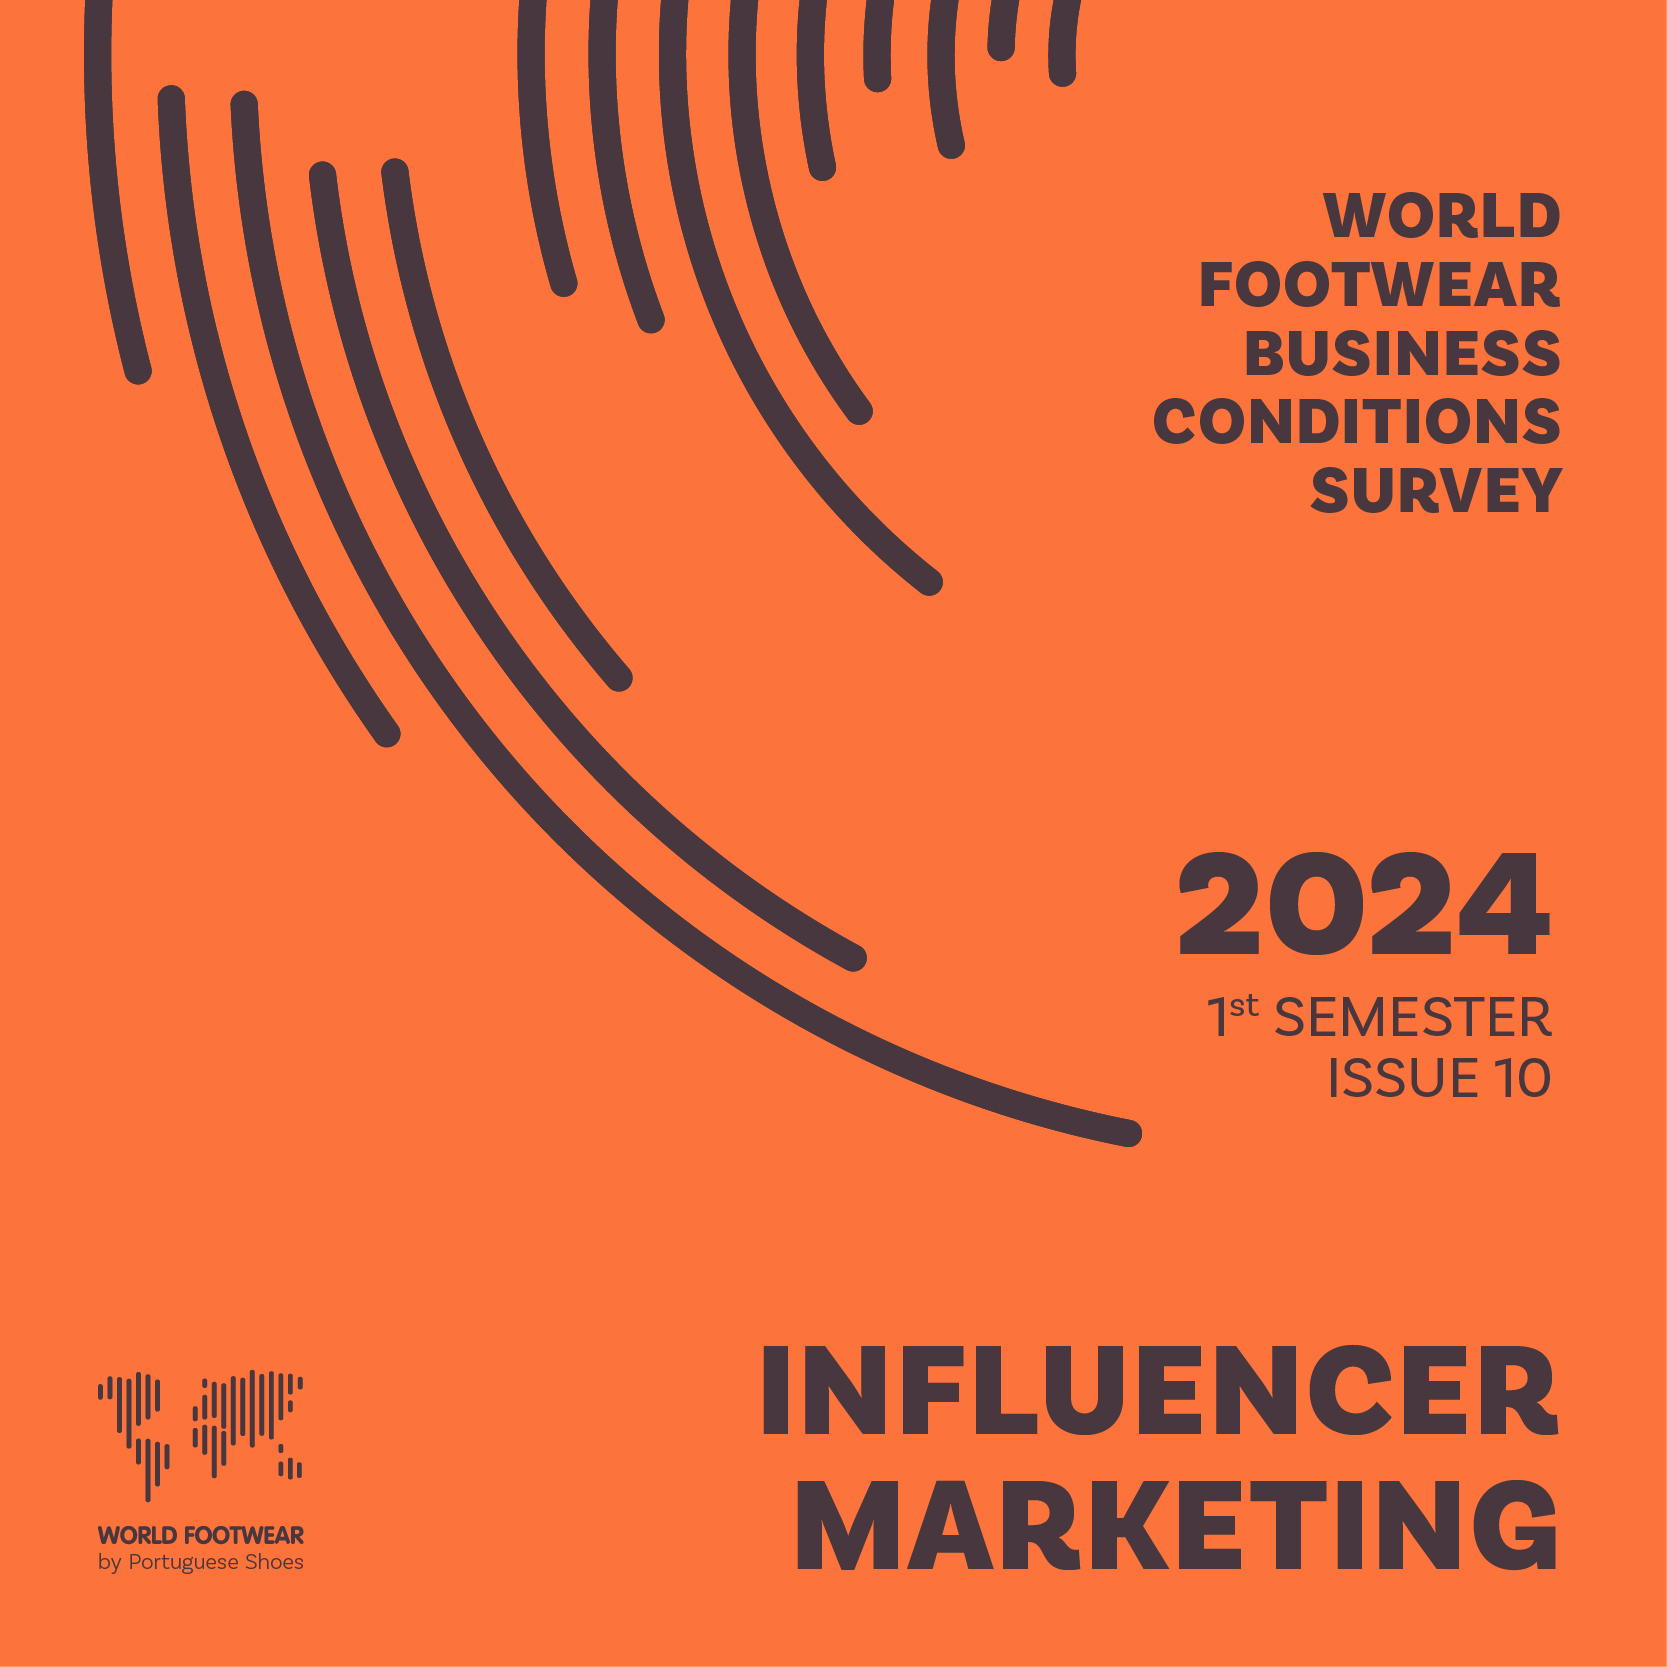 Influencer Marketing seen as a Successful Tool for Footwear